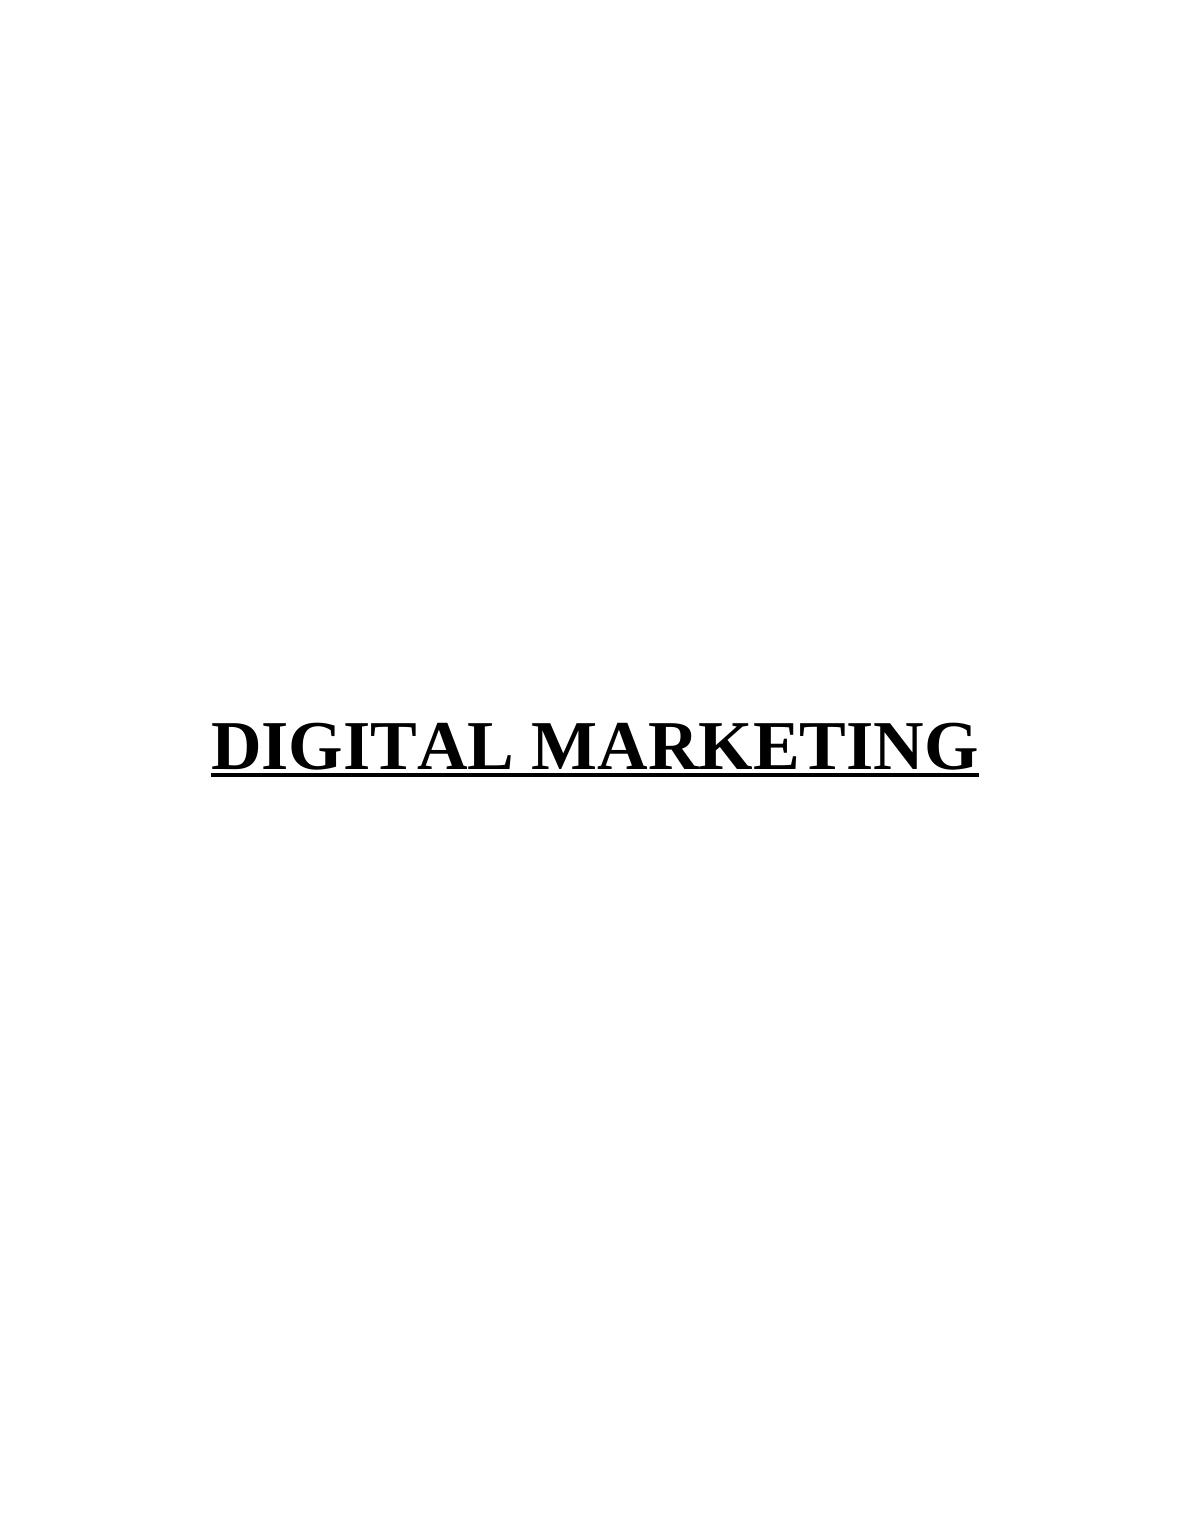 Digital Marketing: Tools and Techniques for Promoting Products and Services_1